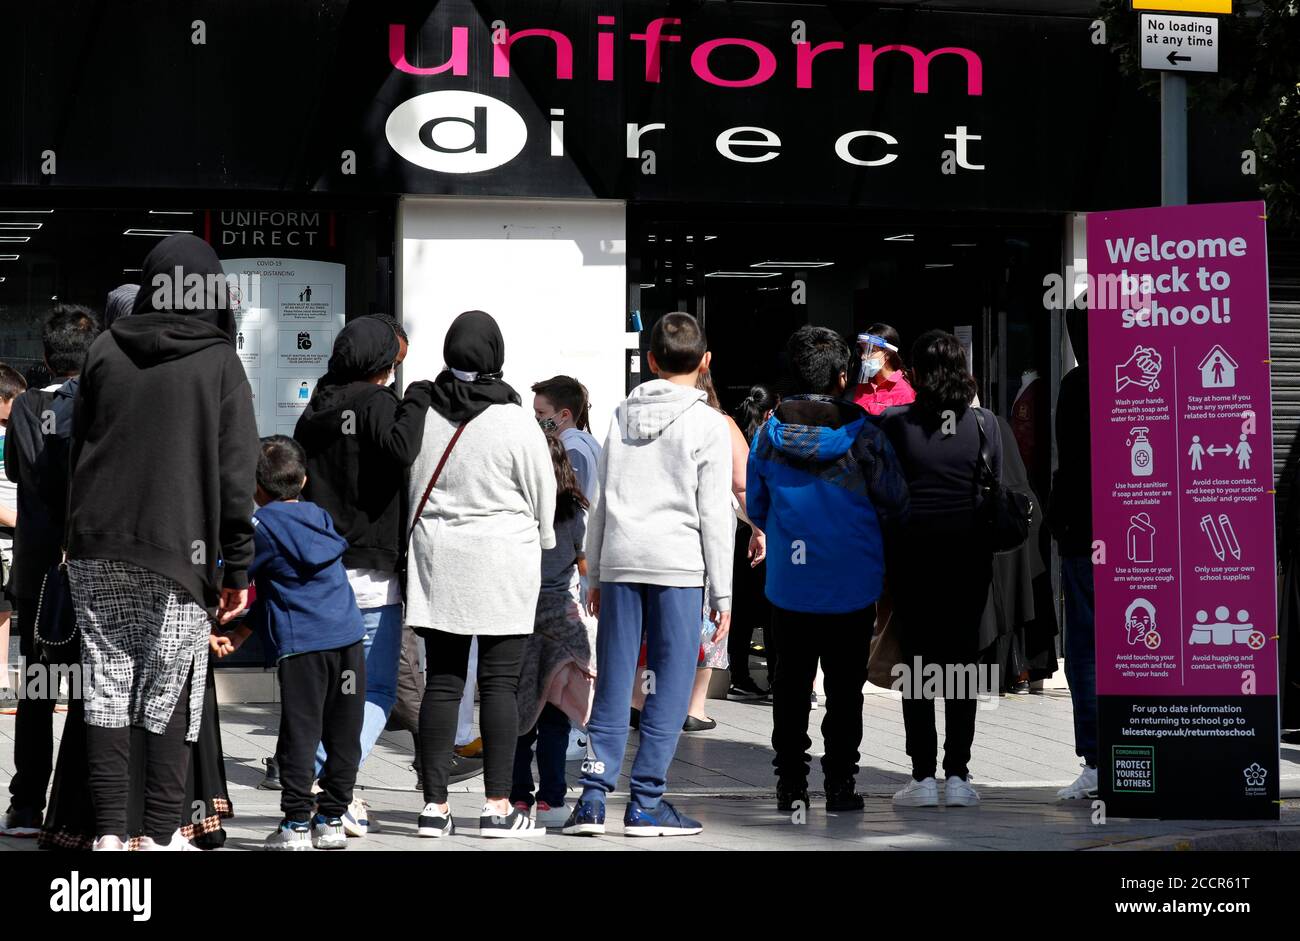 Leicester, Leicestershire, UK. 24th August 2020. Parents and children queue  to buy their school uniforms from a Uniform Direct shop during the  coronavirus pandemic. Prime Minister Boris Johnson says it is Òvitally